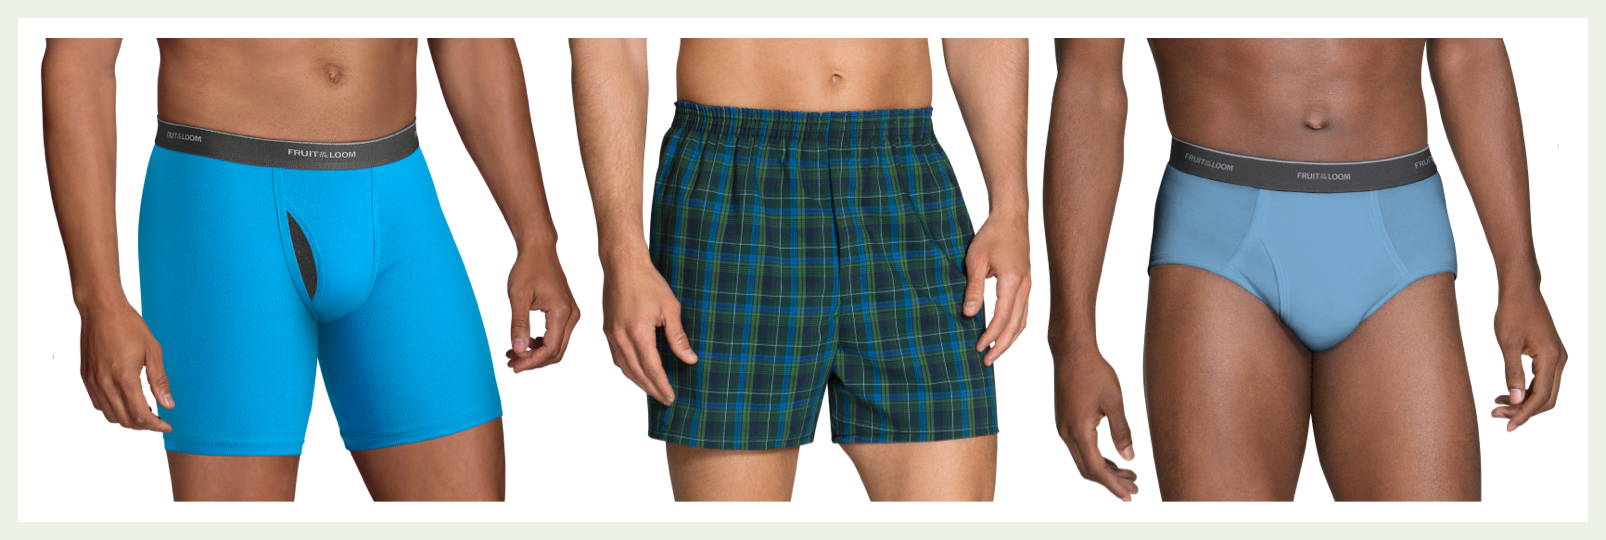 Which is better, woven or knit boxer shorts underwear for men? - Quora